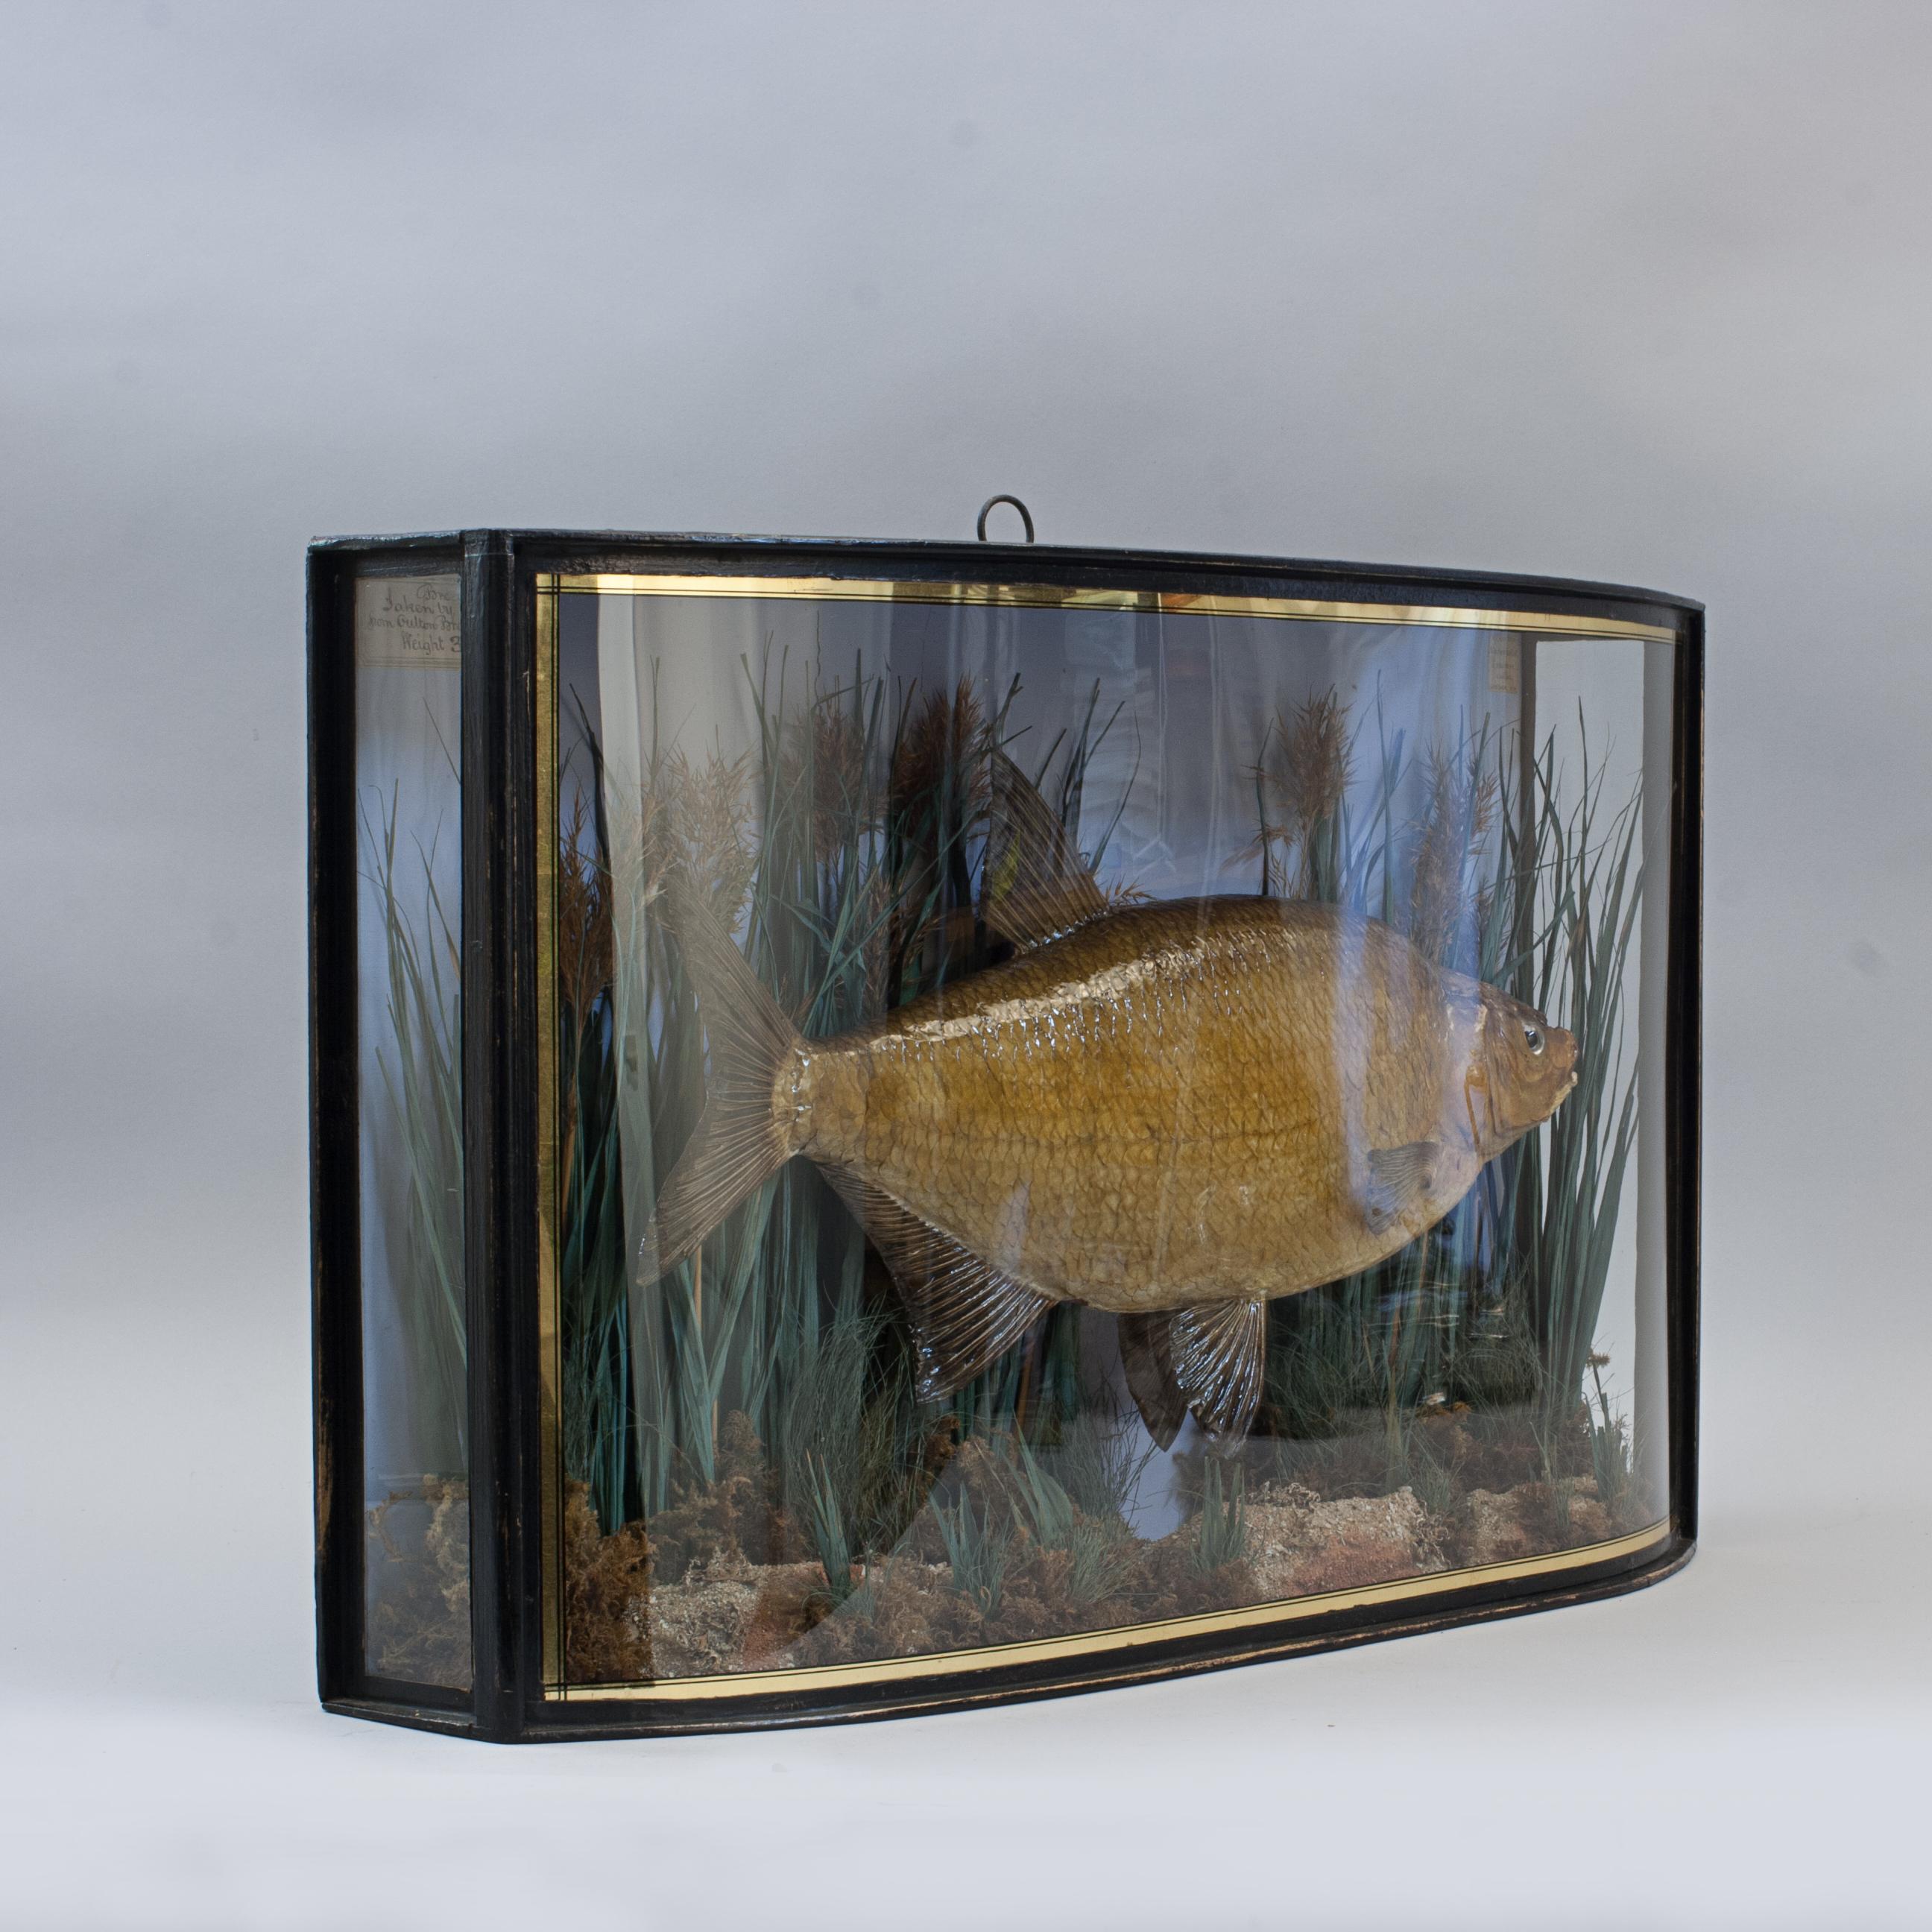 Taxidermy, Preserved Fish, Cased Bream.
A cased bream by Frederick William Anstiss (1864 - 1936) in a nice bow fronted case with gilt lines. The case contains a cleverly modelled bream set against a painted backdrop with realistic river bed